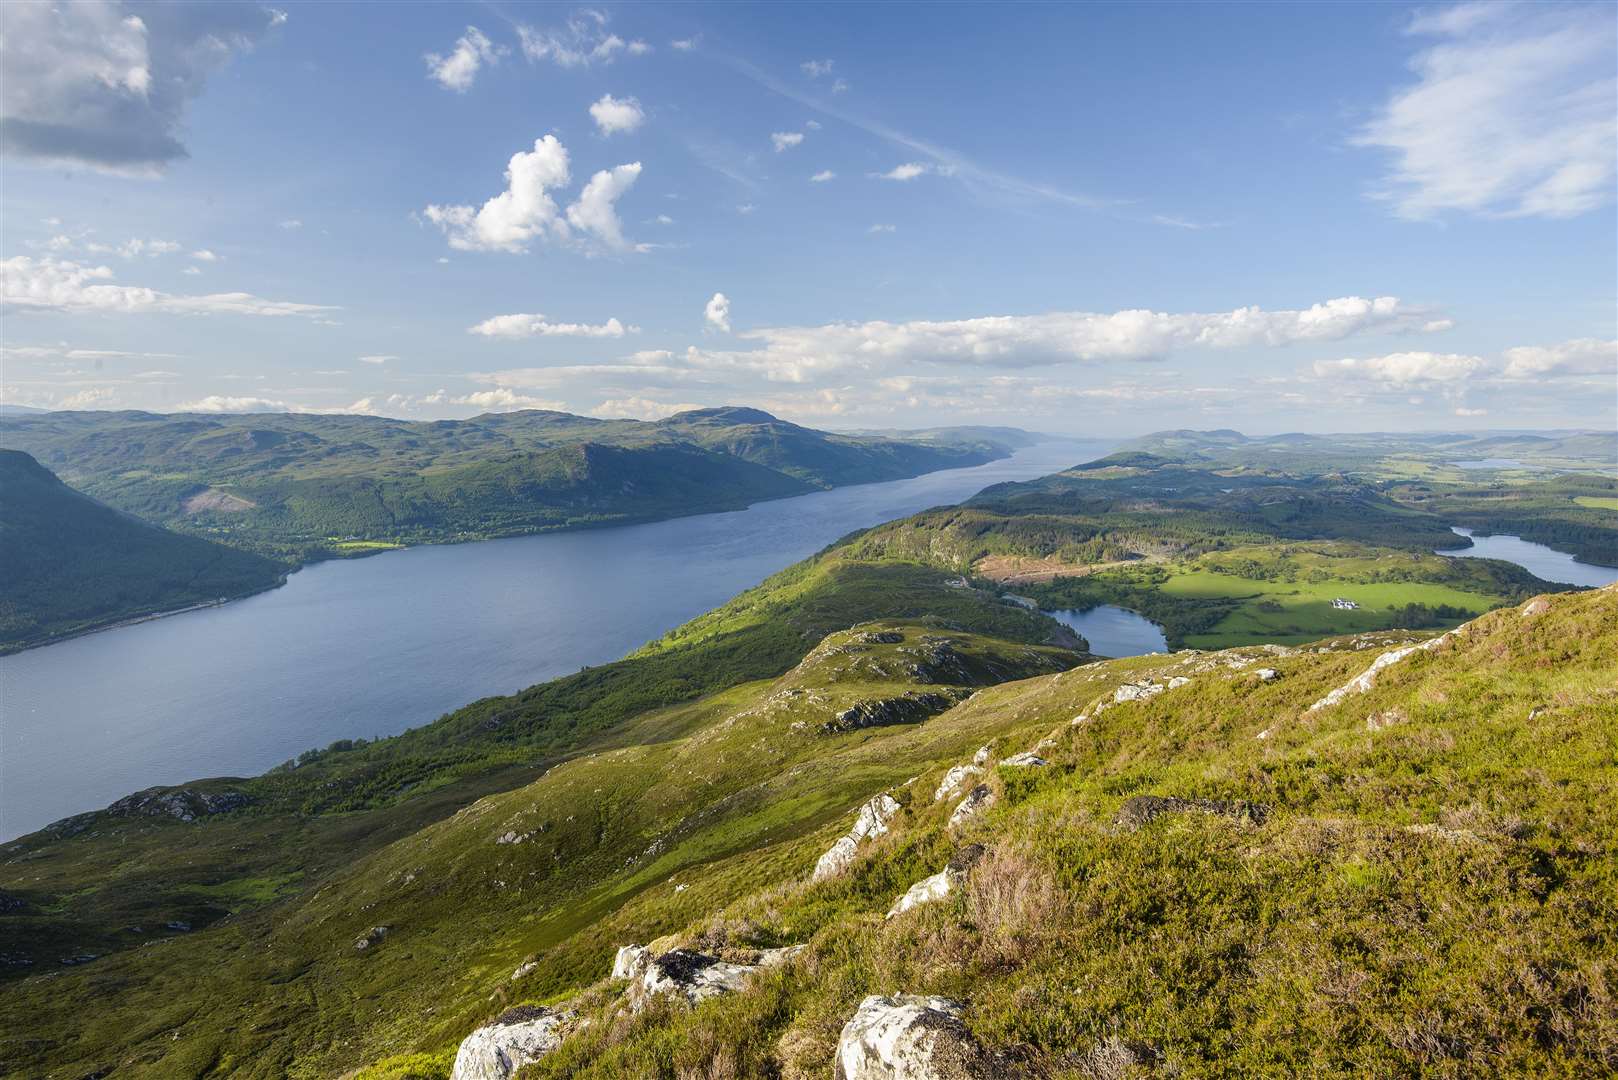 Looking over Loch Ness, the type of view VILN hopes will entice visitors back to the Highlands in time.